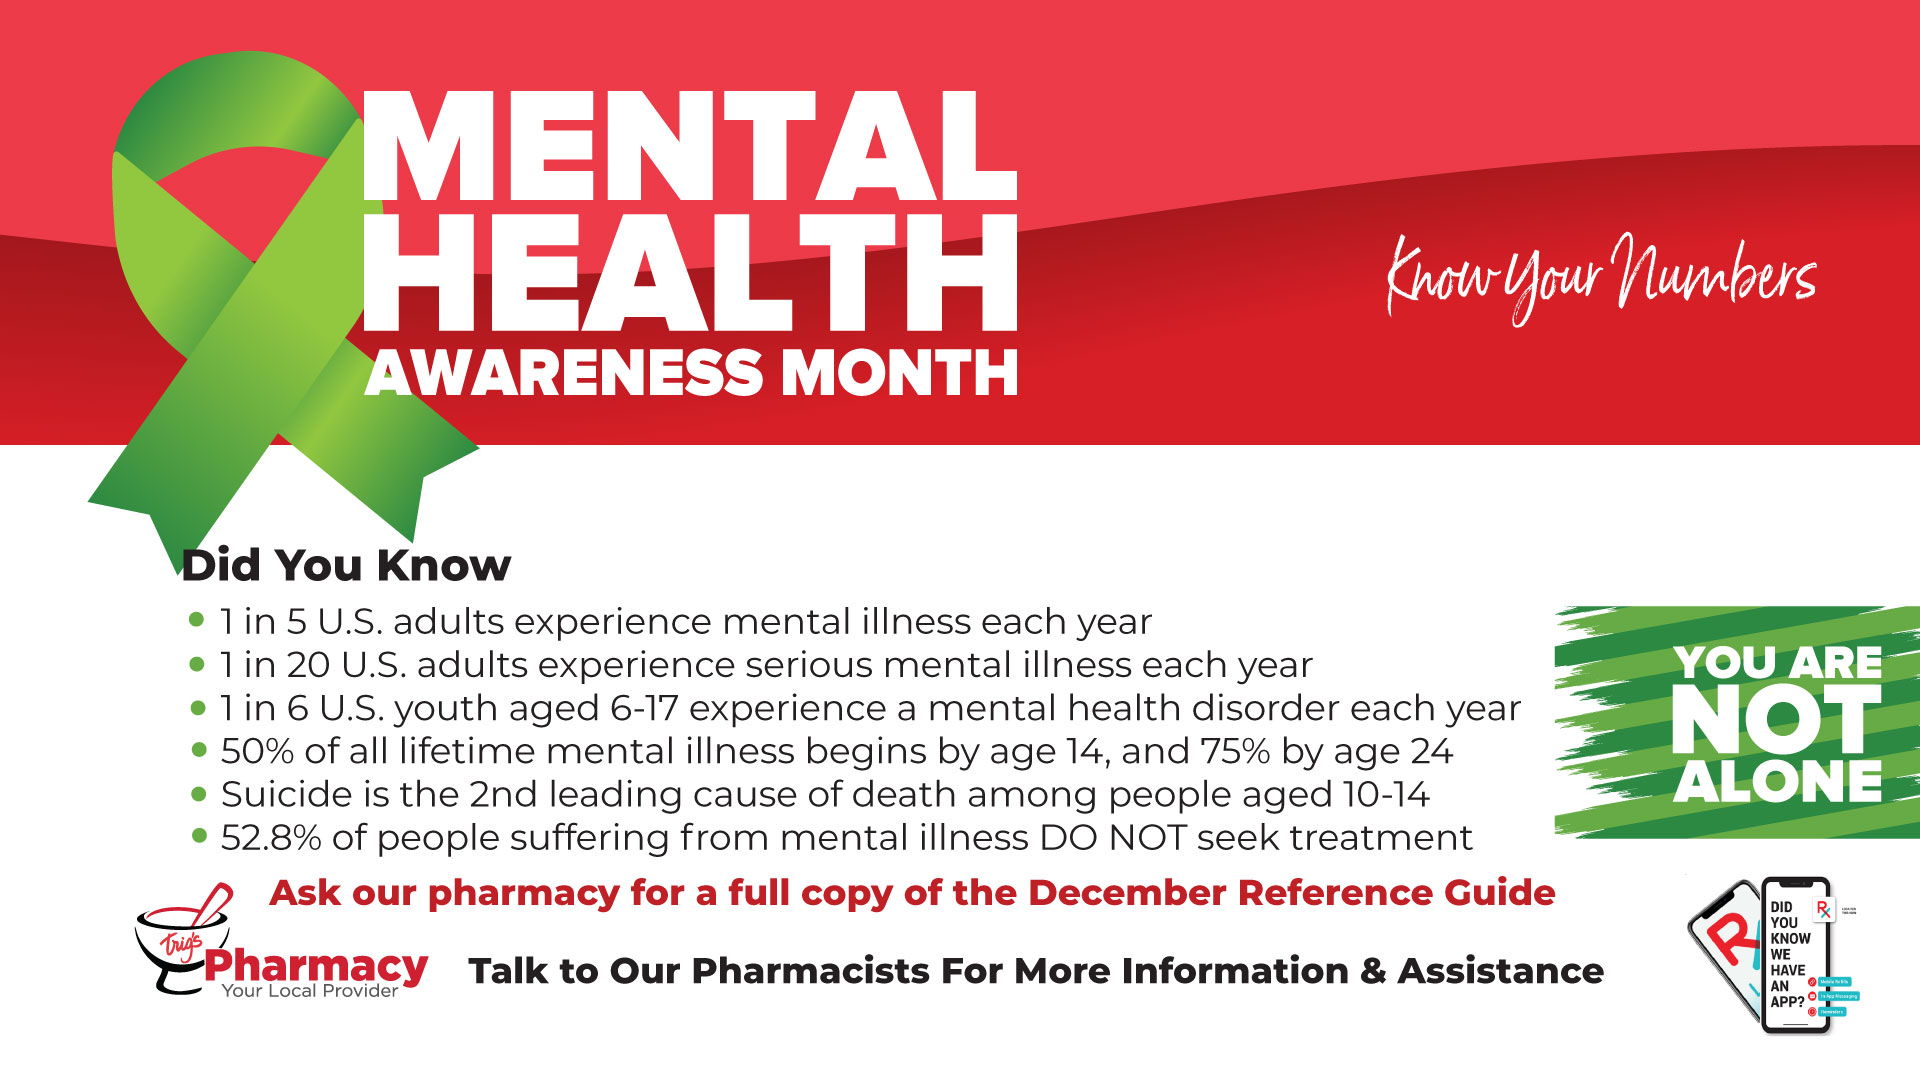 Download your December Know Your Numbers Mental Health Awareness Guide.